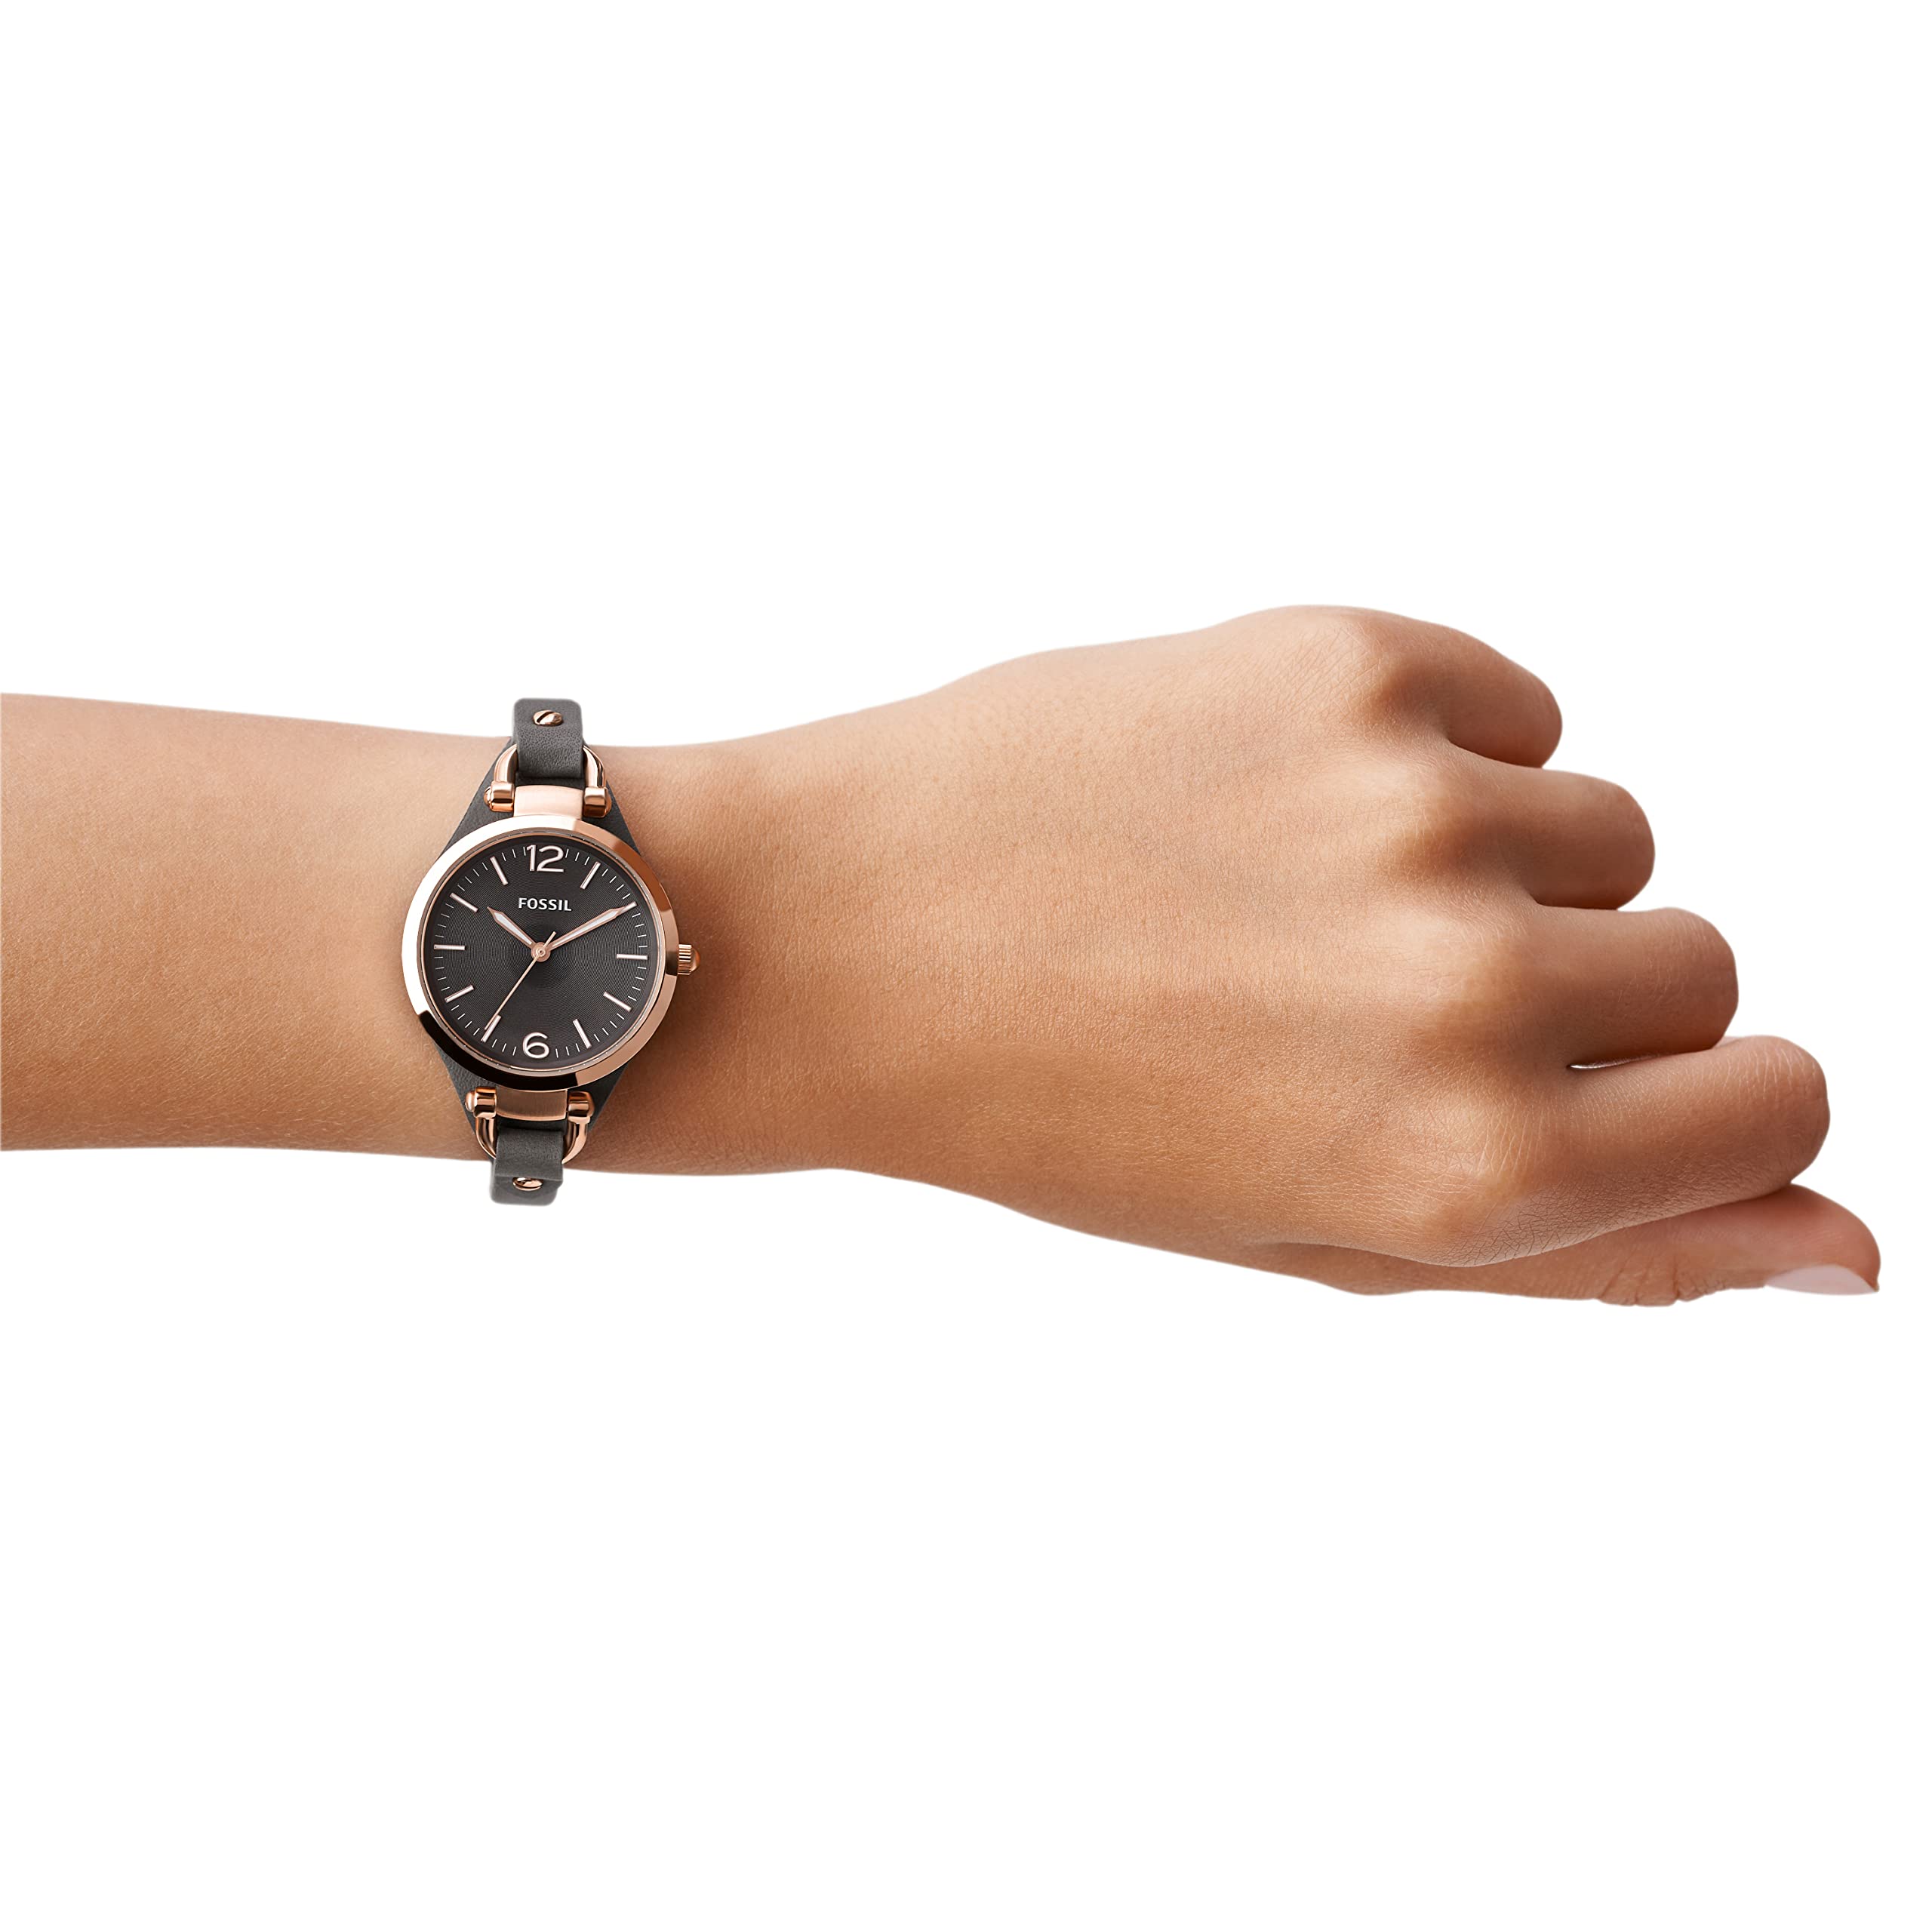 Fossil Women's Georgia Quartz Stainless Steel and Leather Three-Hand Watch, Color: Rose Gold, Grey (Model: ES3077)